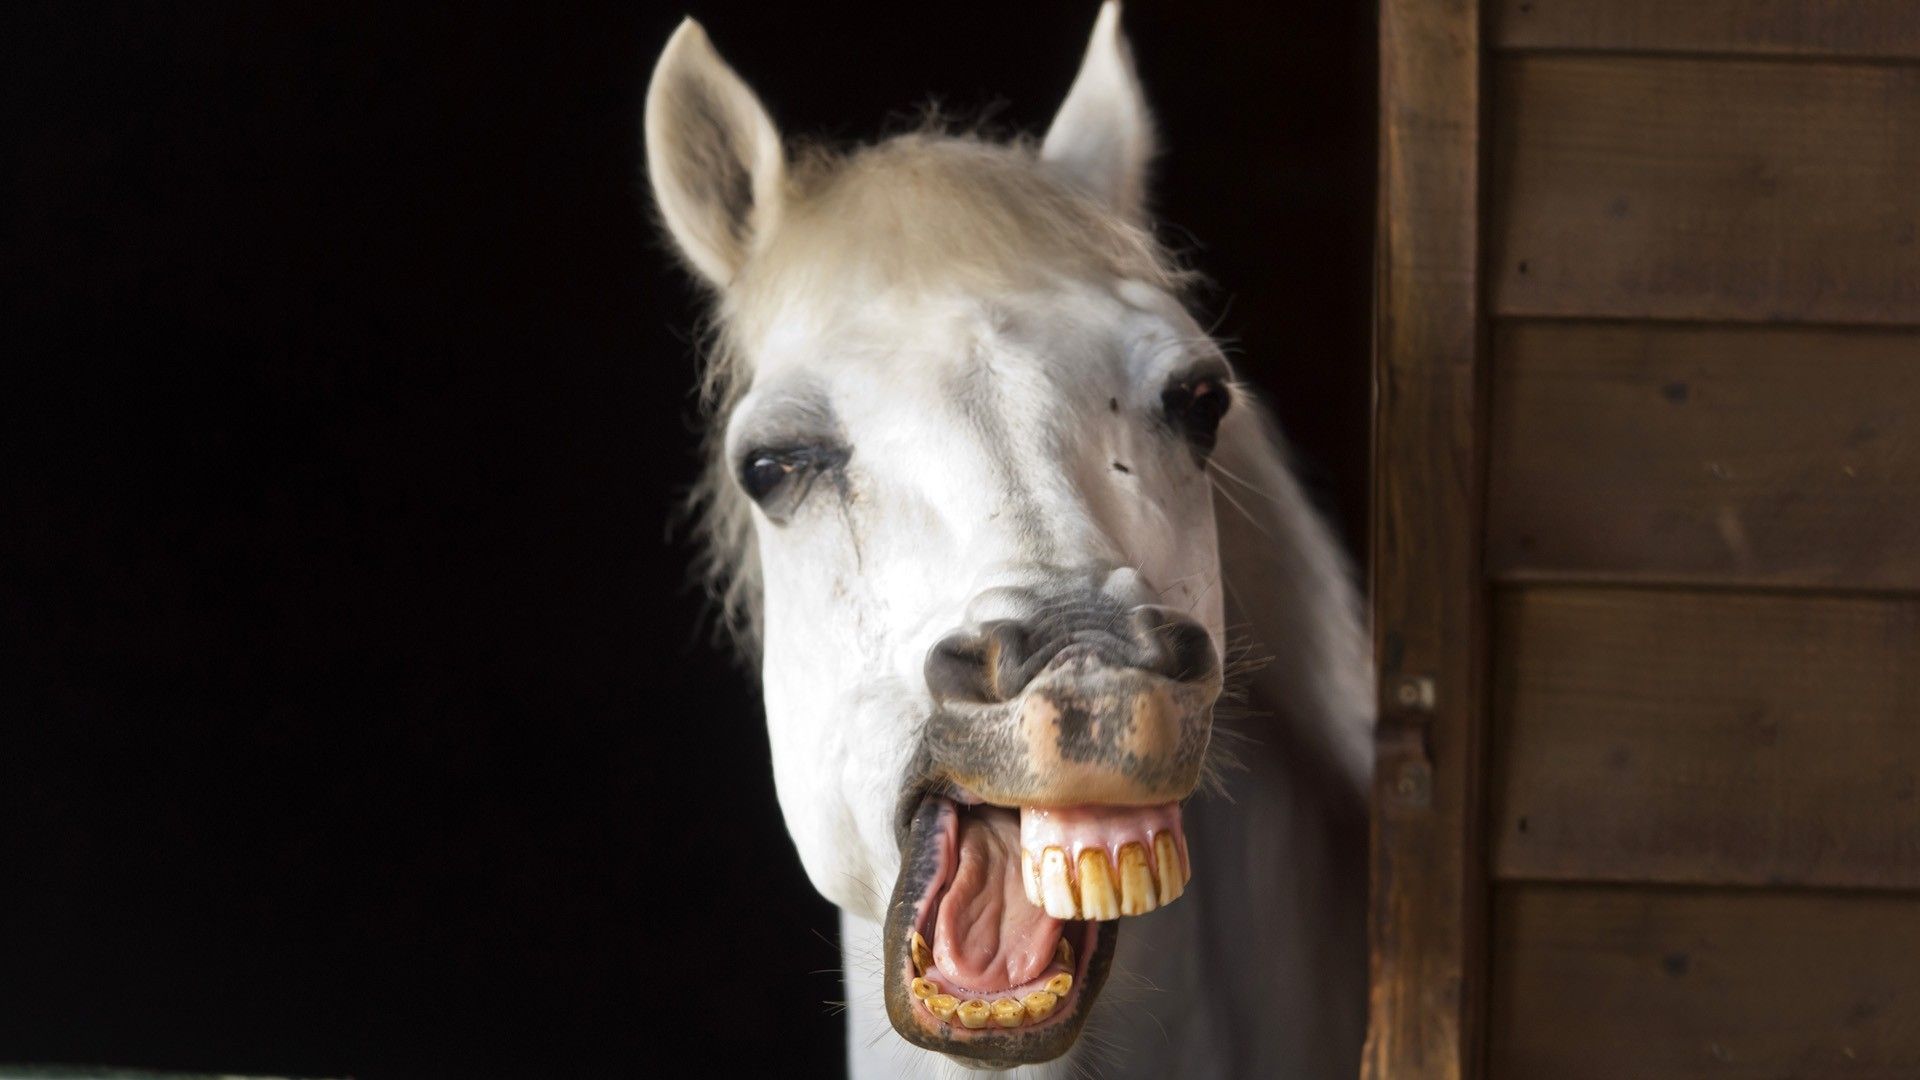 Funny horse picture for desktop and wallpaper. Funny horses, Horse smiling, Horses